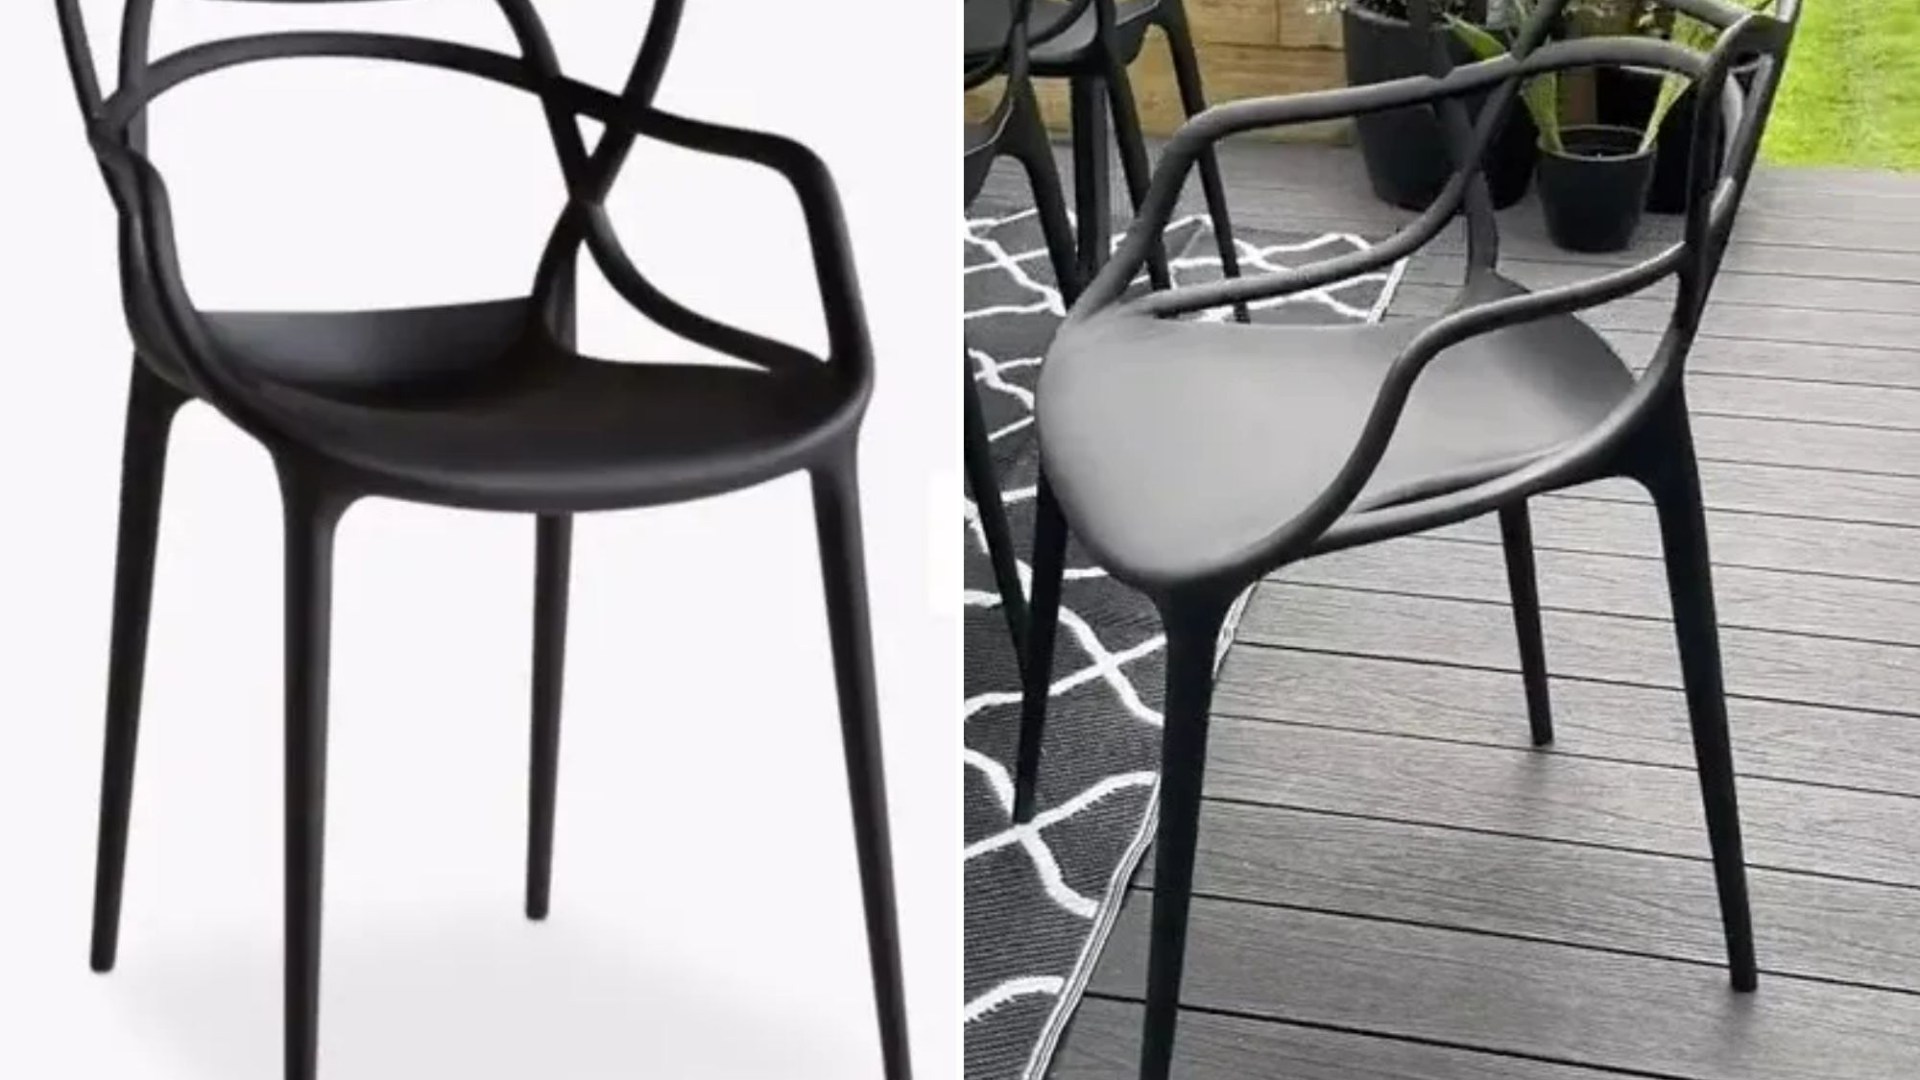 I fell in love with some designer garden chairs at 223 EACH so I used a clever hack to snap up dupes for just 19 a pop [Video]